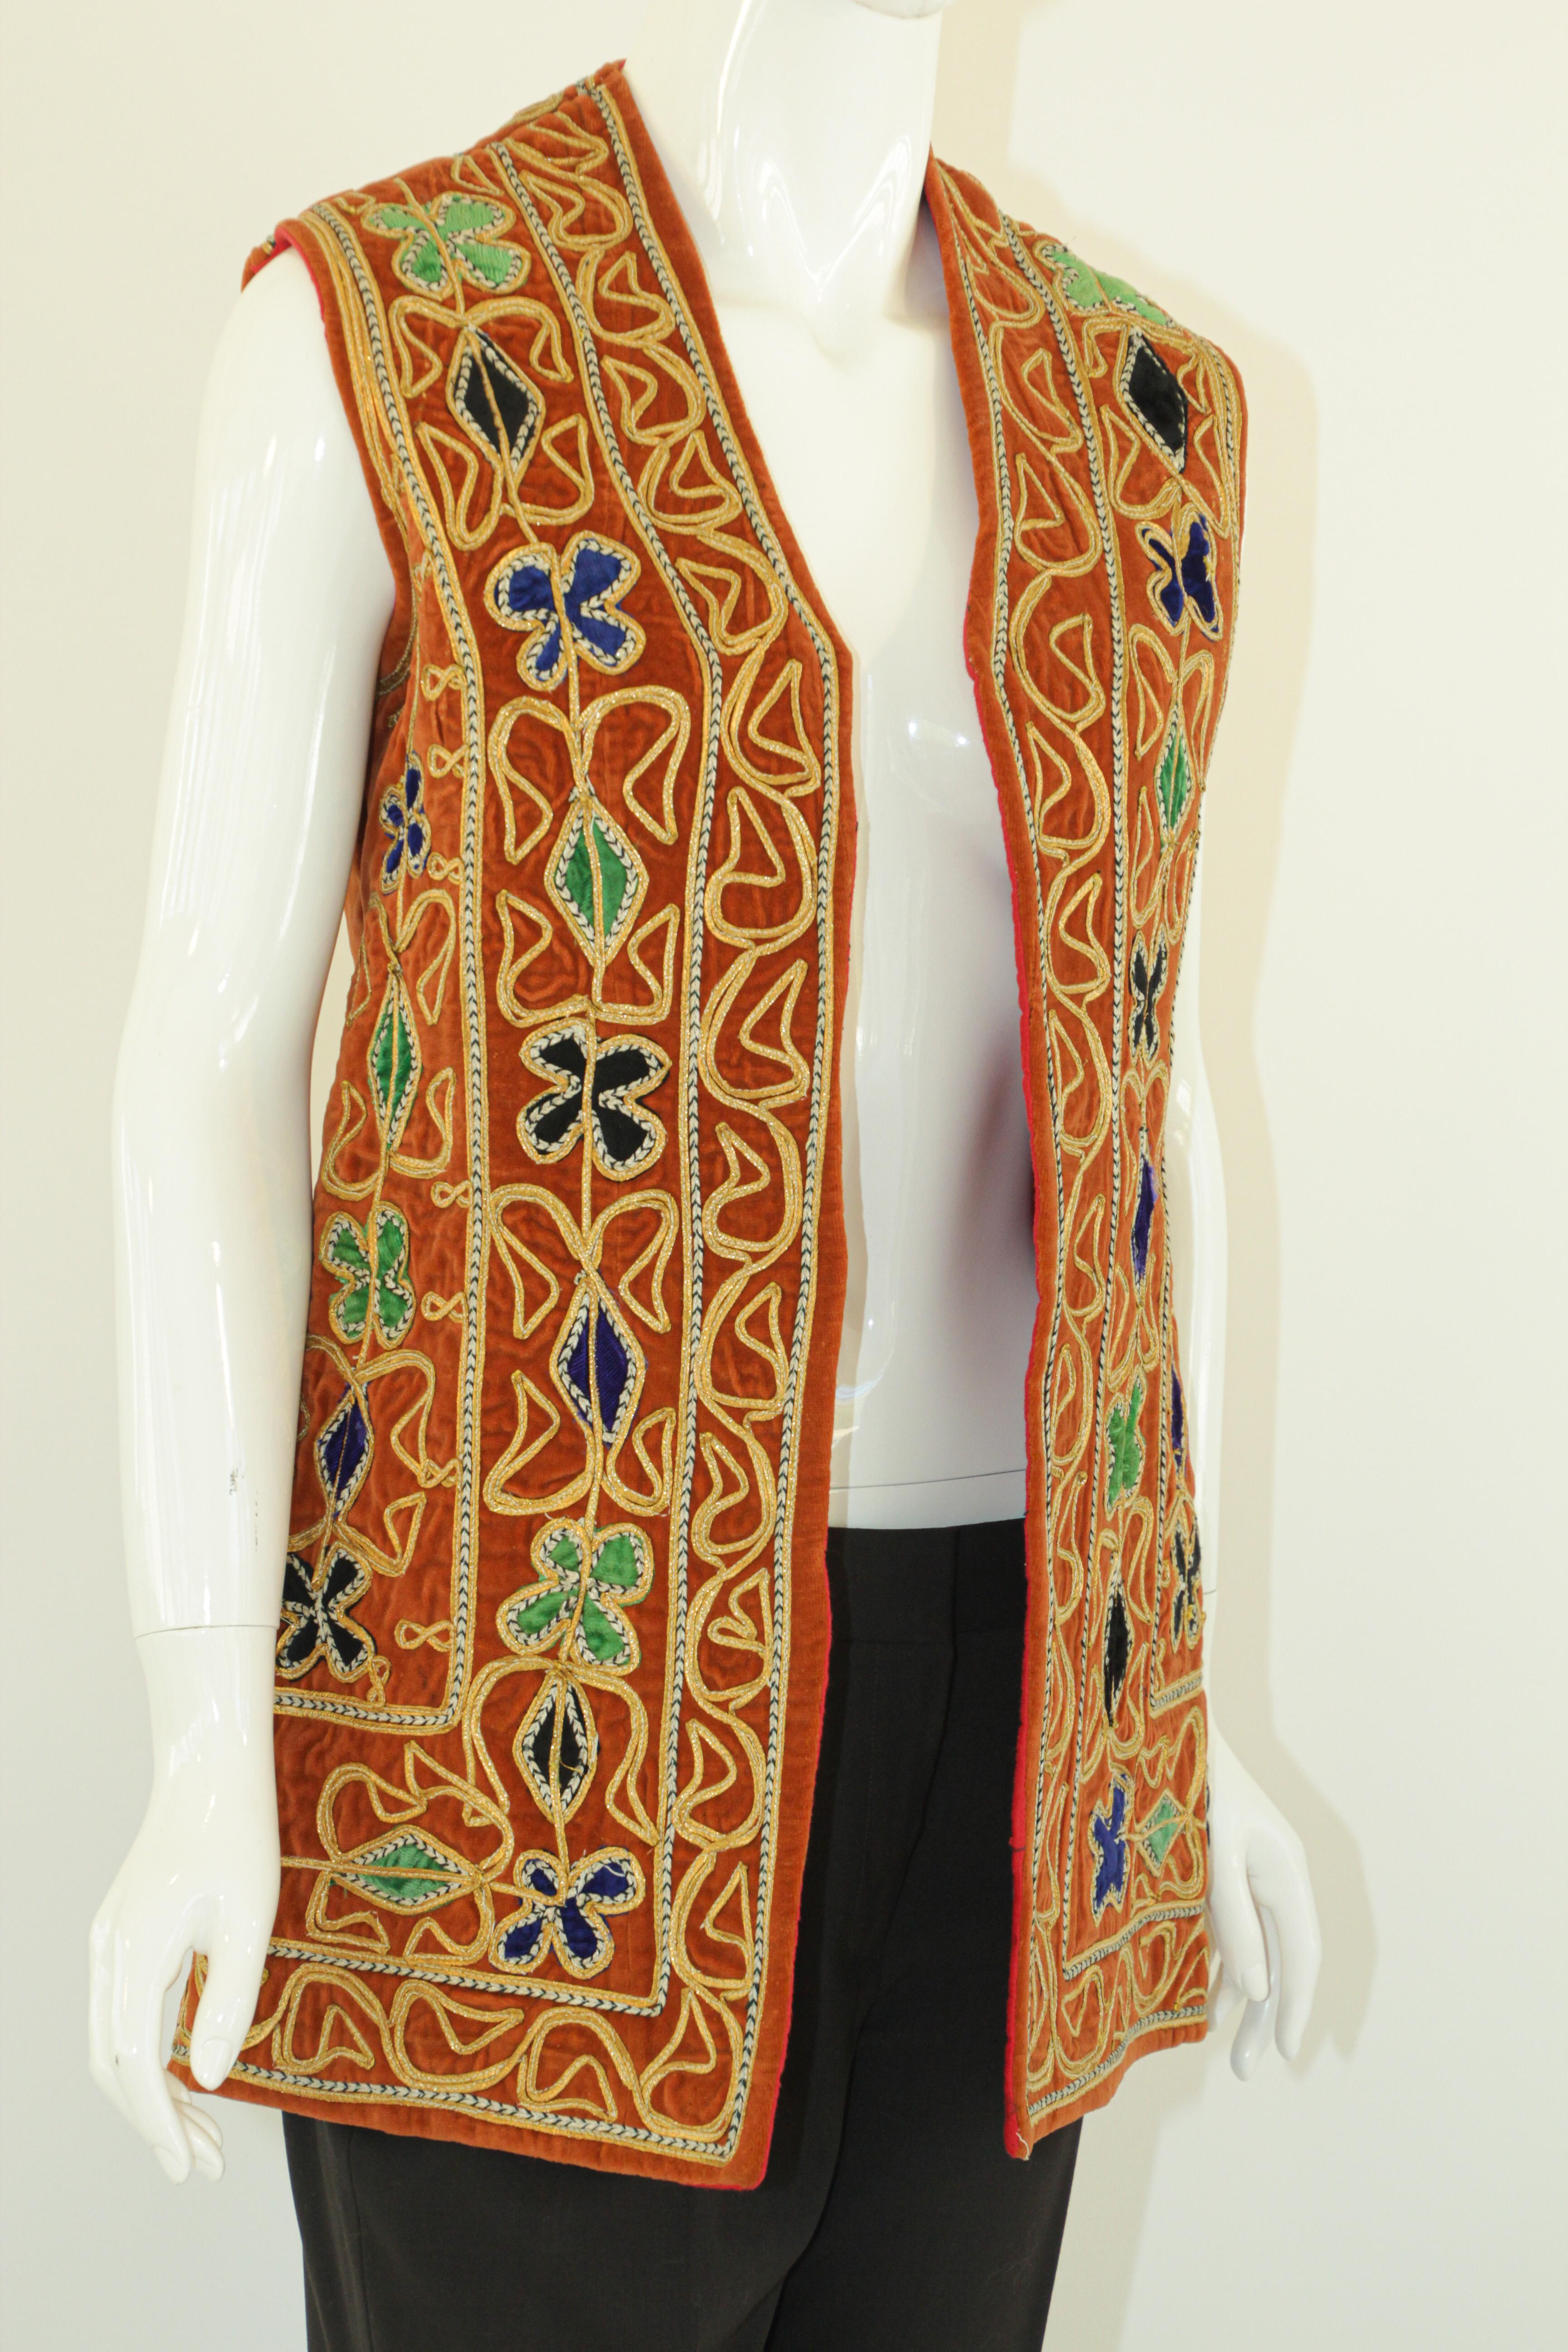 Vintage ethnic vest brightly colored embroidered design of geometric patterns in blue, yellow, green, gold, against a burnt orange brown velvet ground, lined in red.
Asian, Middle Eastern, Turkish or Afghanistan ethnic folk costume.
Great colorful